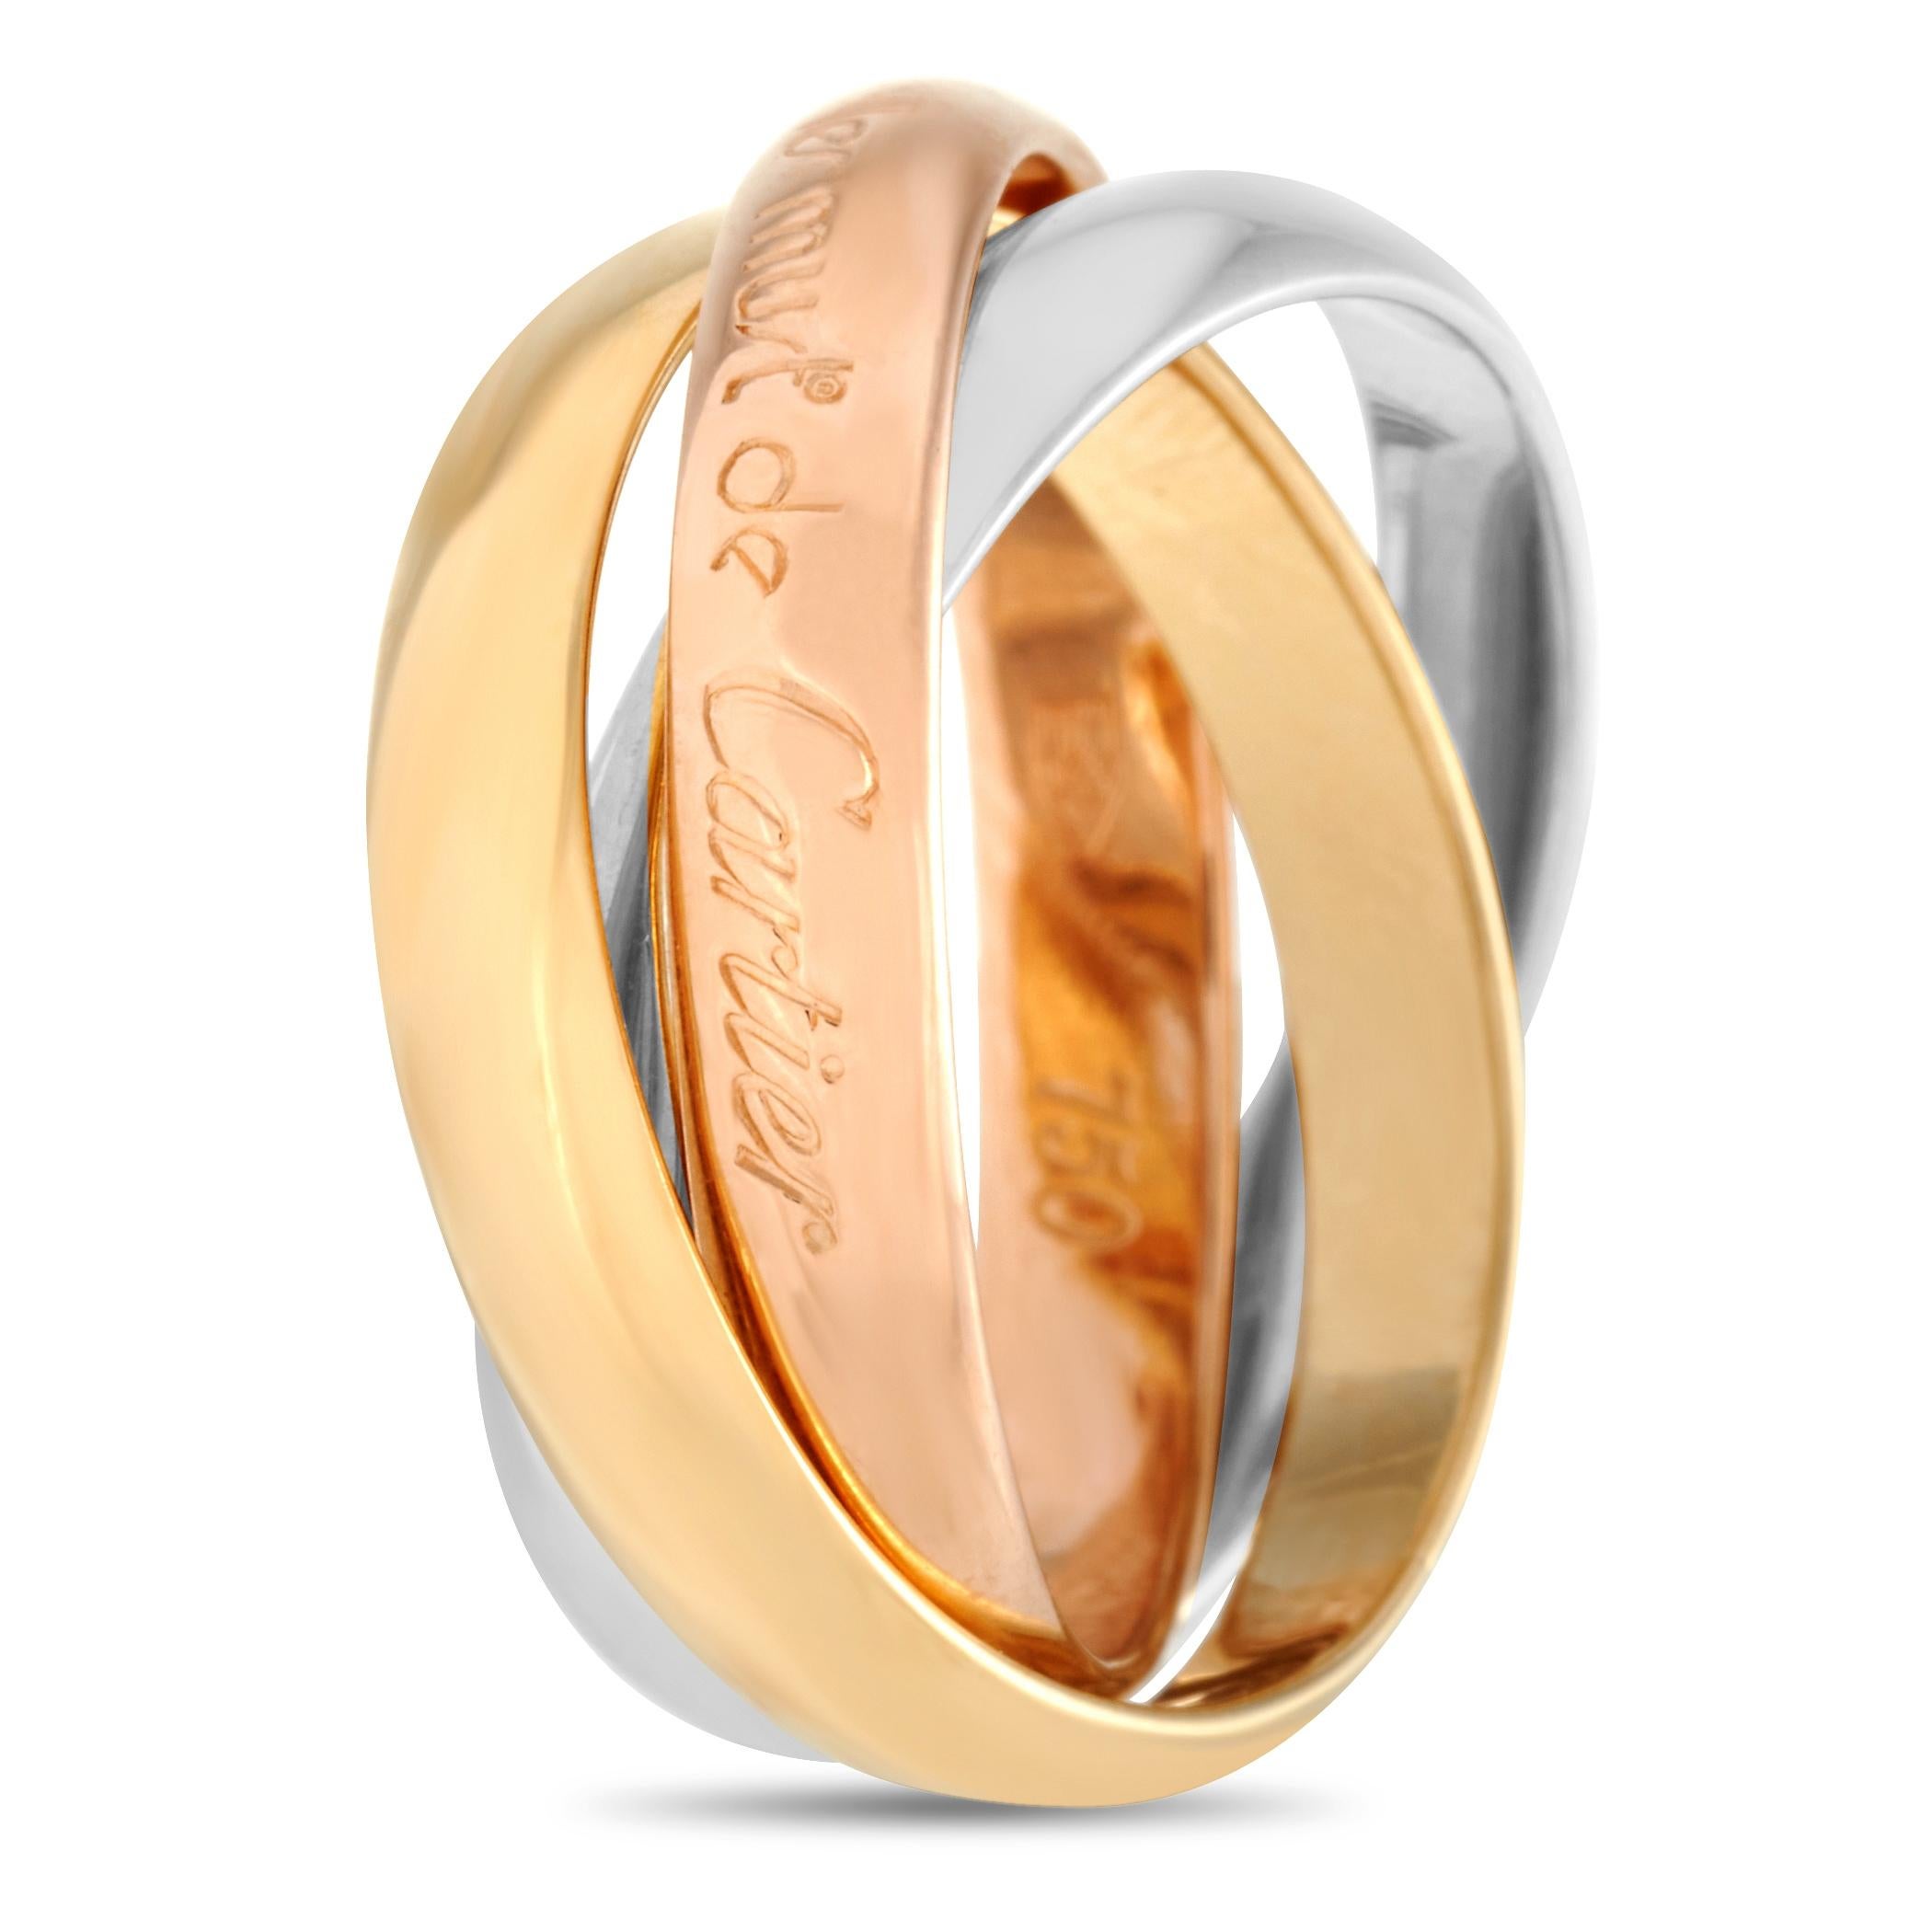 The Cartier “Trinity” ring is made out of 18K yellow, rose and white gold. It weighs 7.1 grams and boasts band thickness of 7 mm.

This item is offered in estate condition and includes the manufacturer’s pouch.
Ring Size: 4.5, 5.25, 6.0